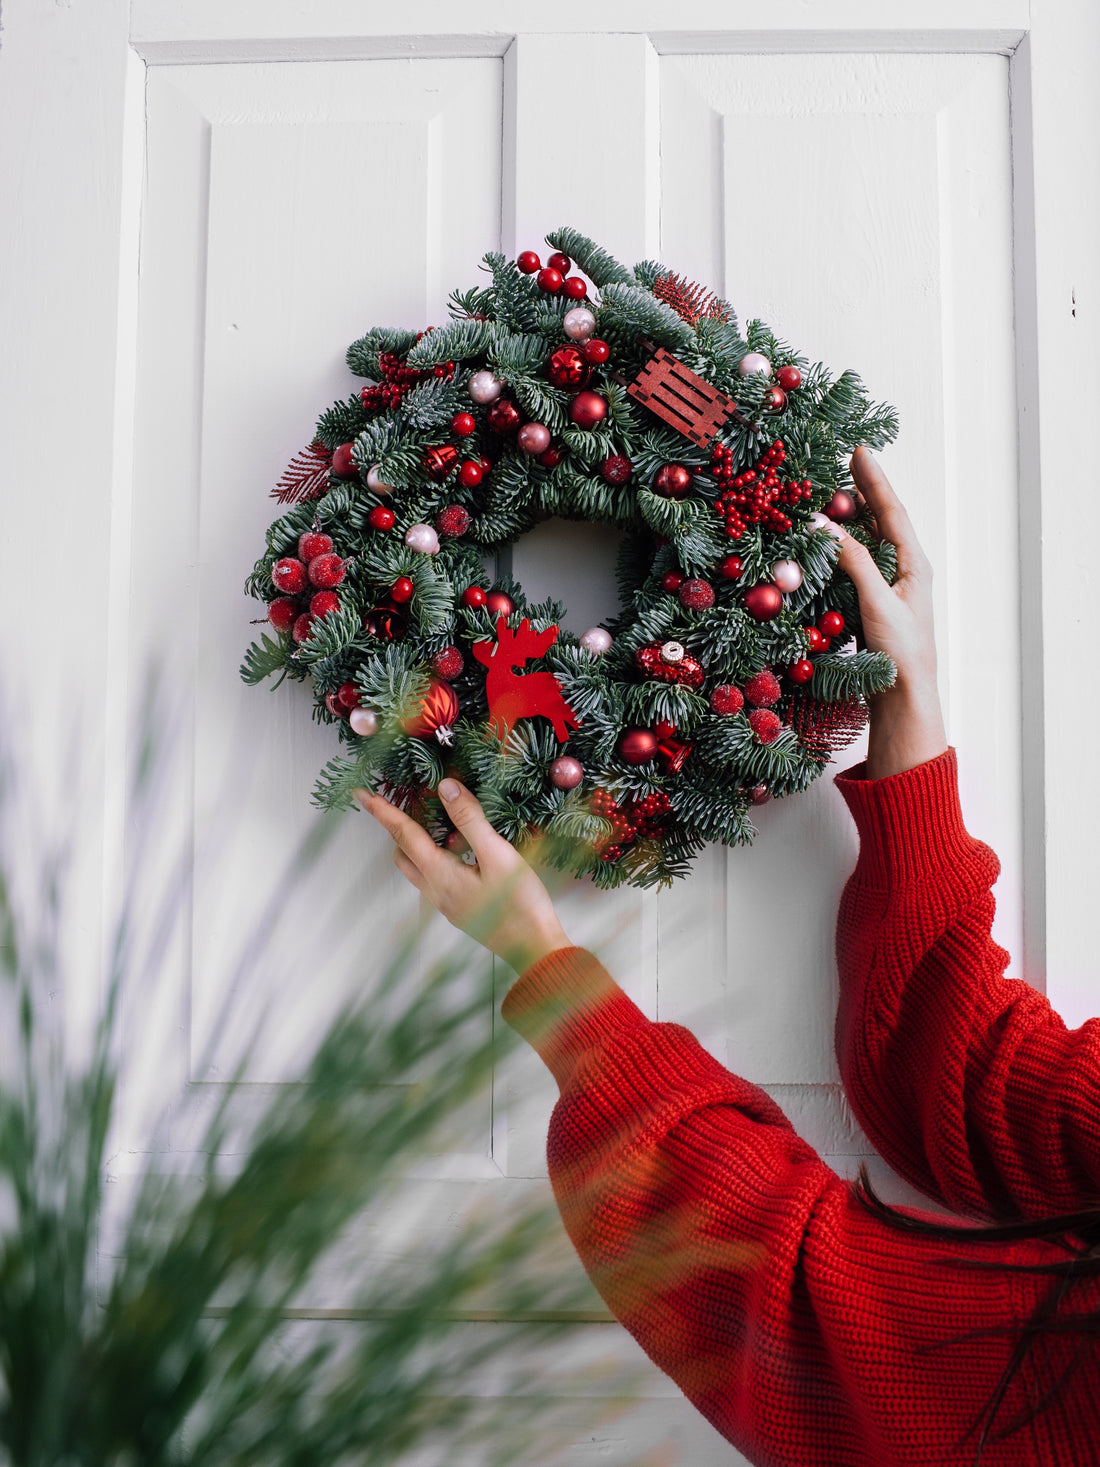 Weatherproofing and Safeguarding Your Holiday Decorations